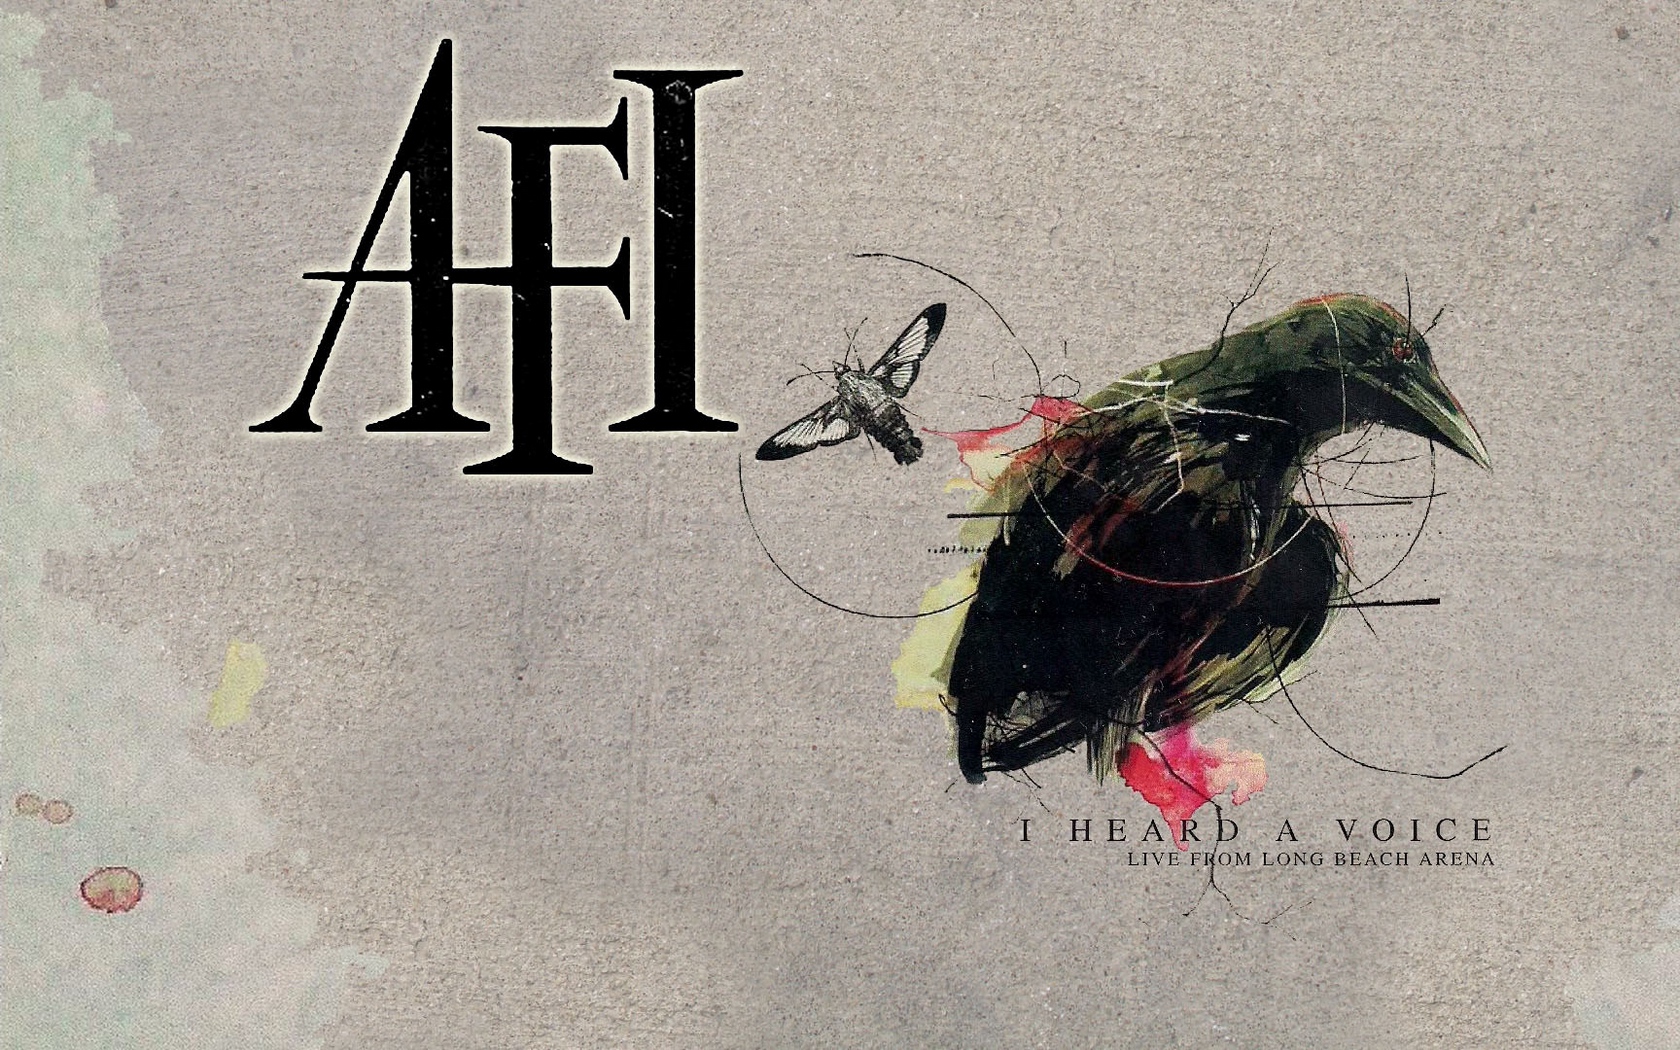 Download wallpaper 1680x1050 afi, bird, insect, cover, text